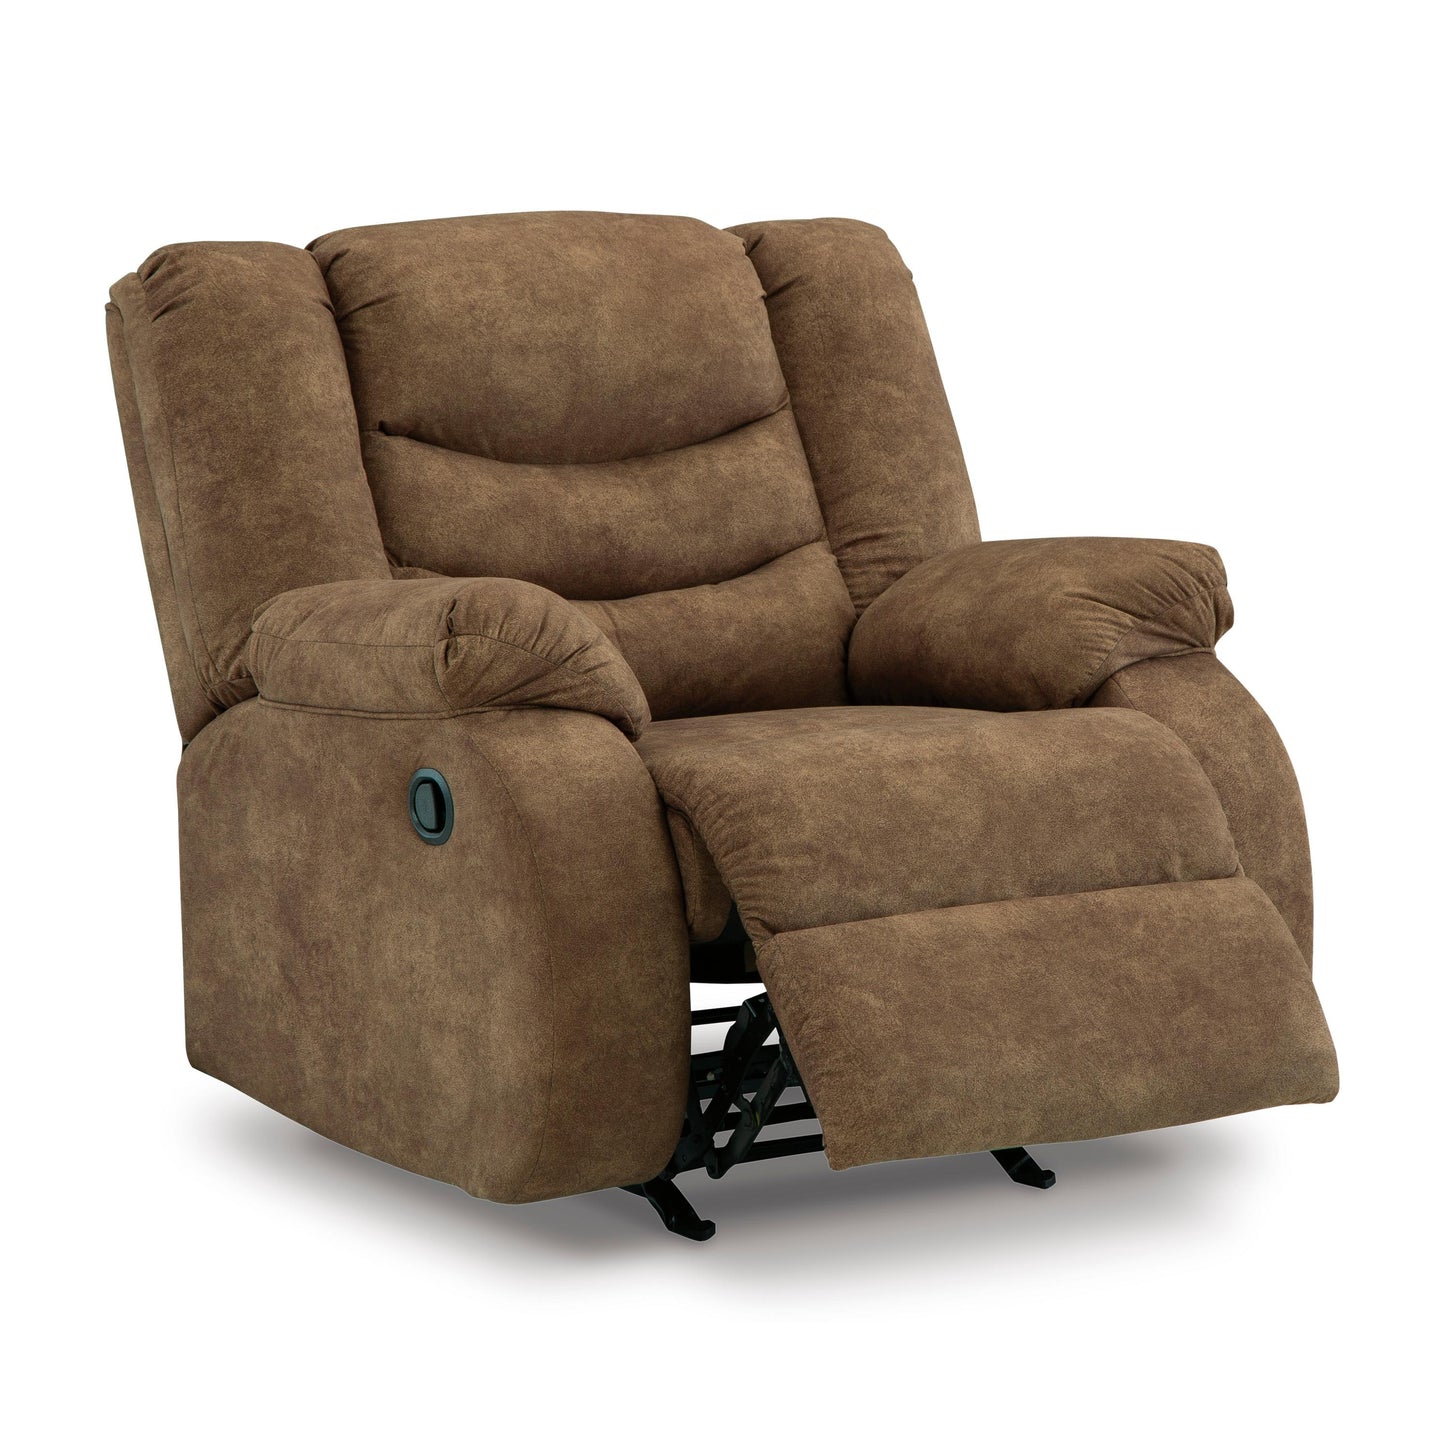 Signature Design by Ashley Partymate Rocker Leather Look Recliner 3690225 IMAGE 2